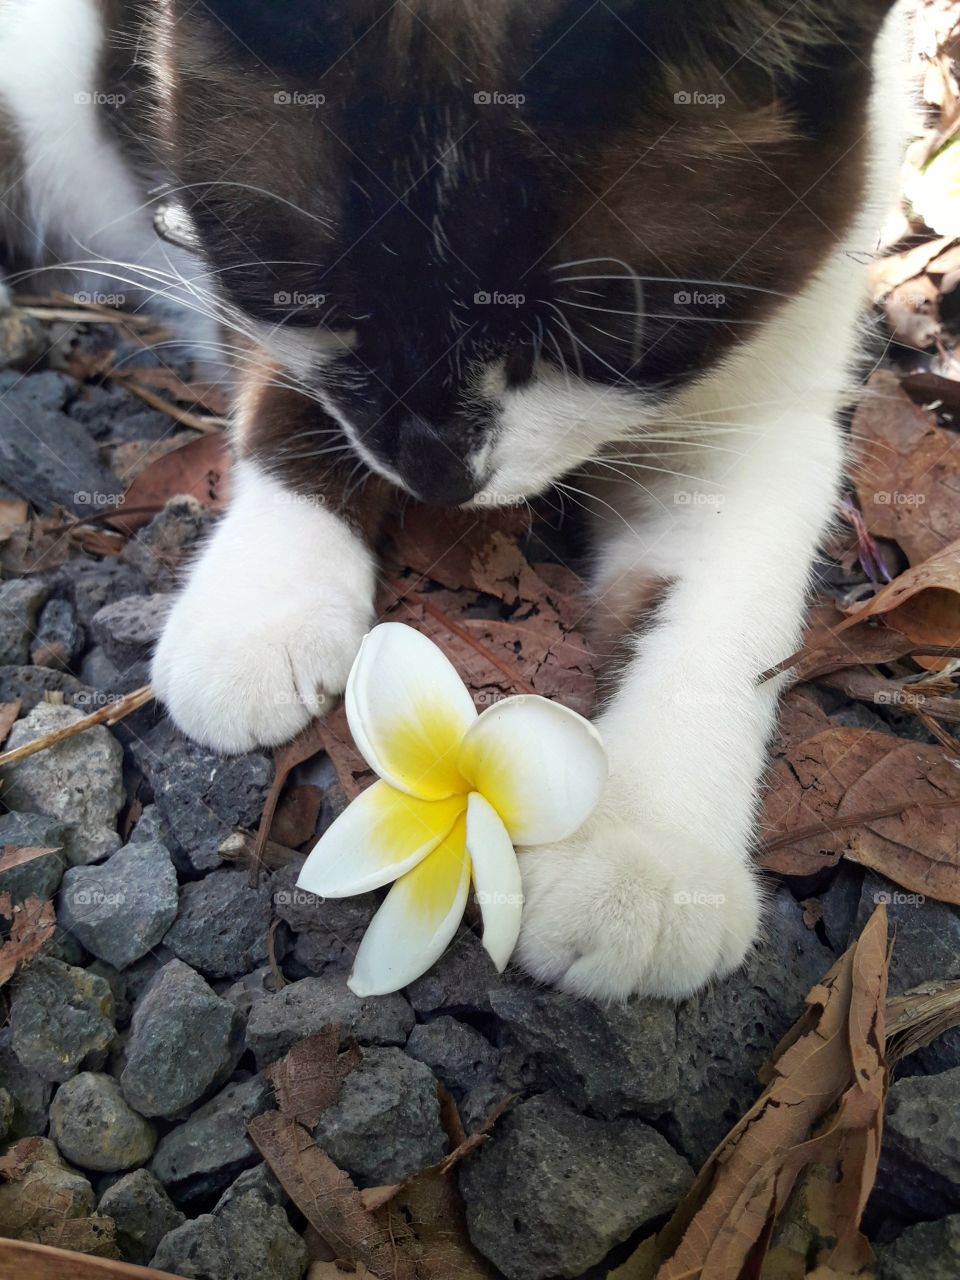 Cute kitty playing with a colorful and beautiful flower